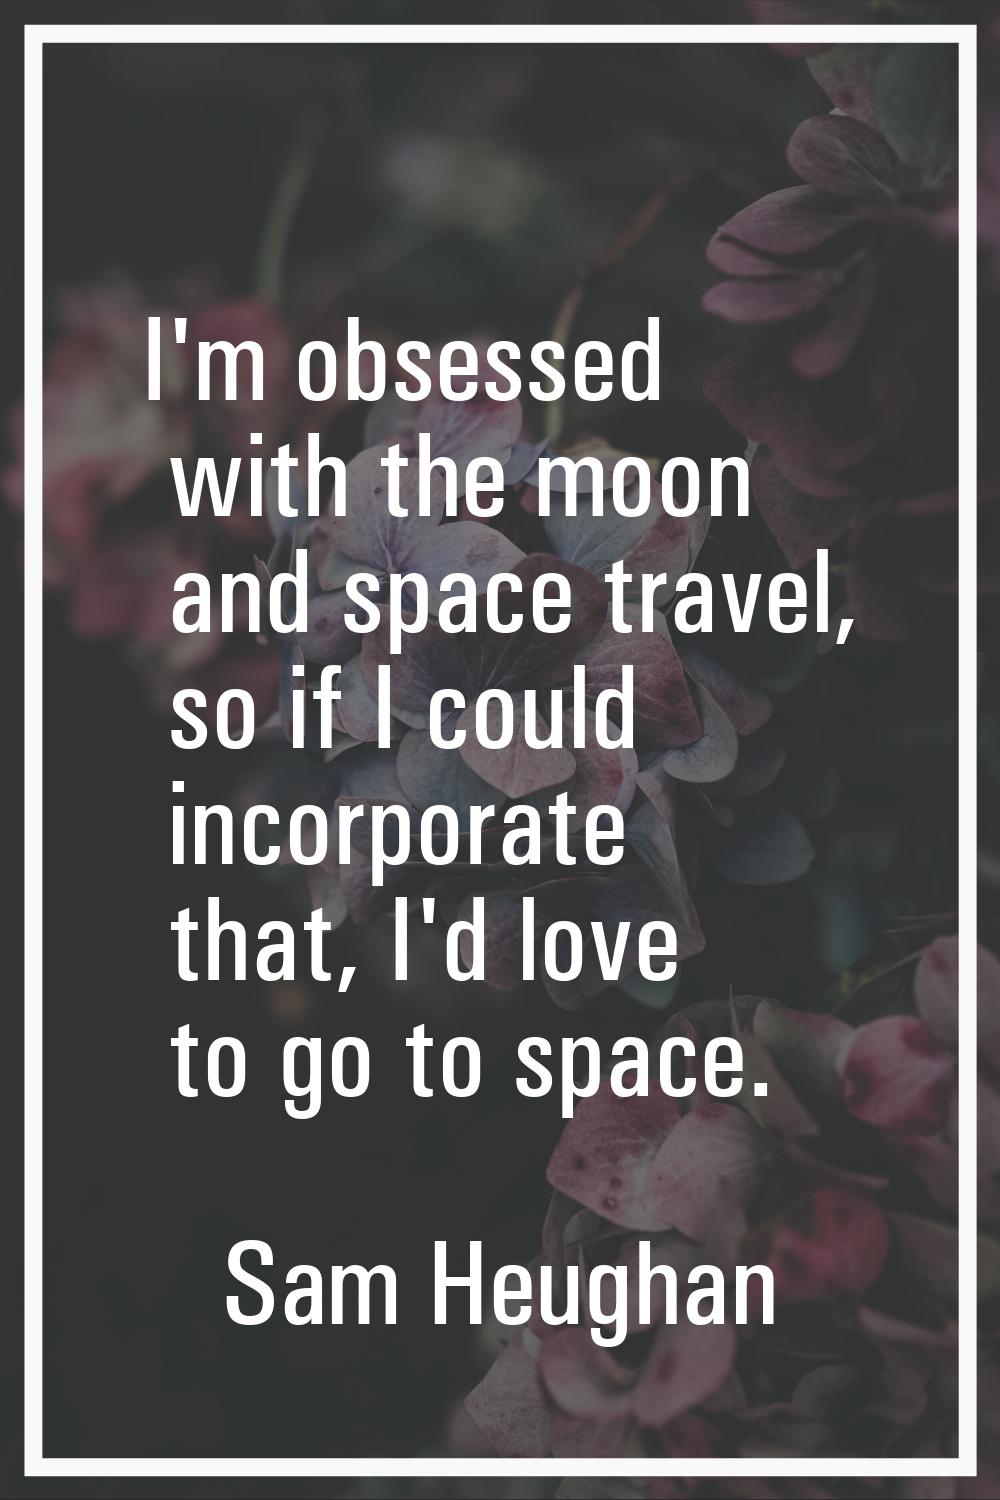 I'm obsessed with the moon and space travel, so if I could incorporate that, I'd love to go to spac